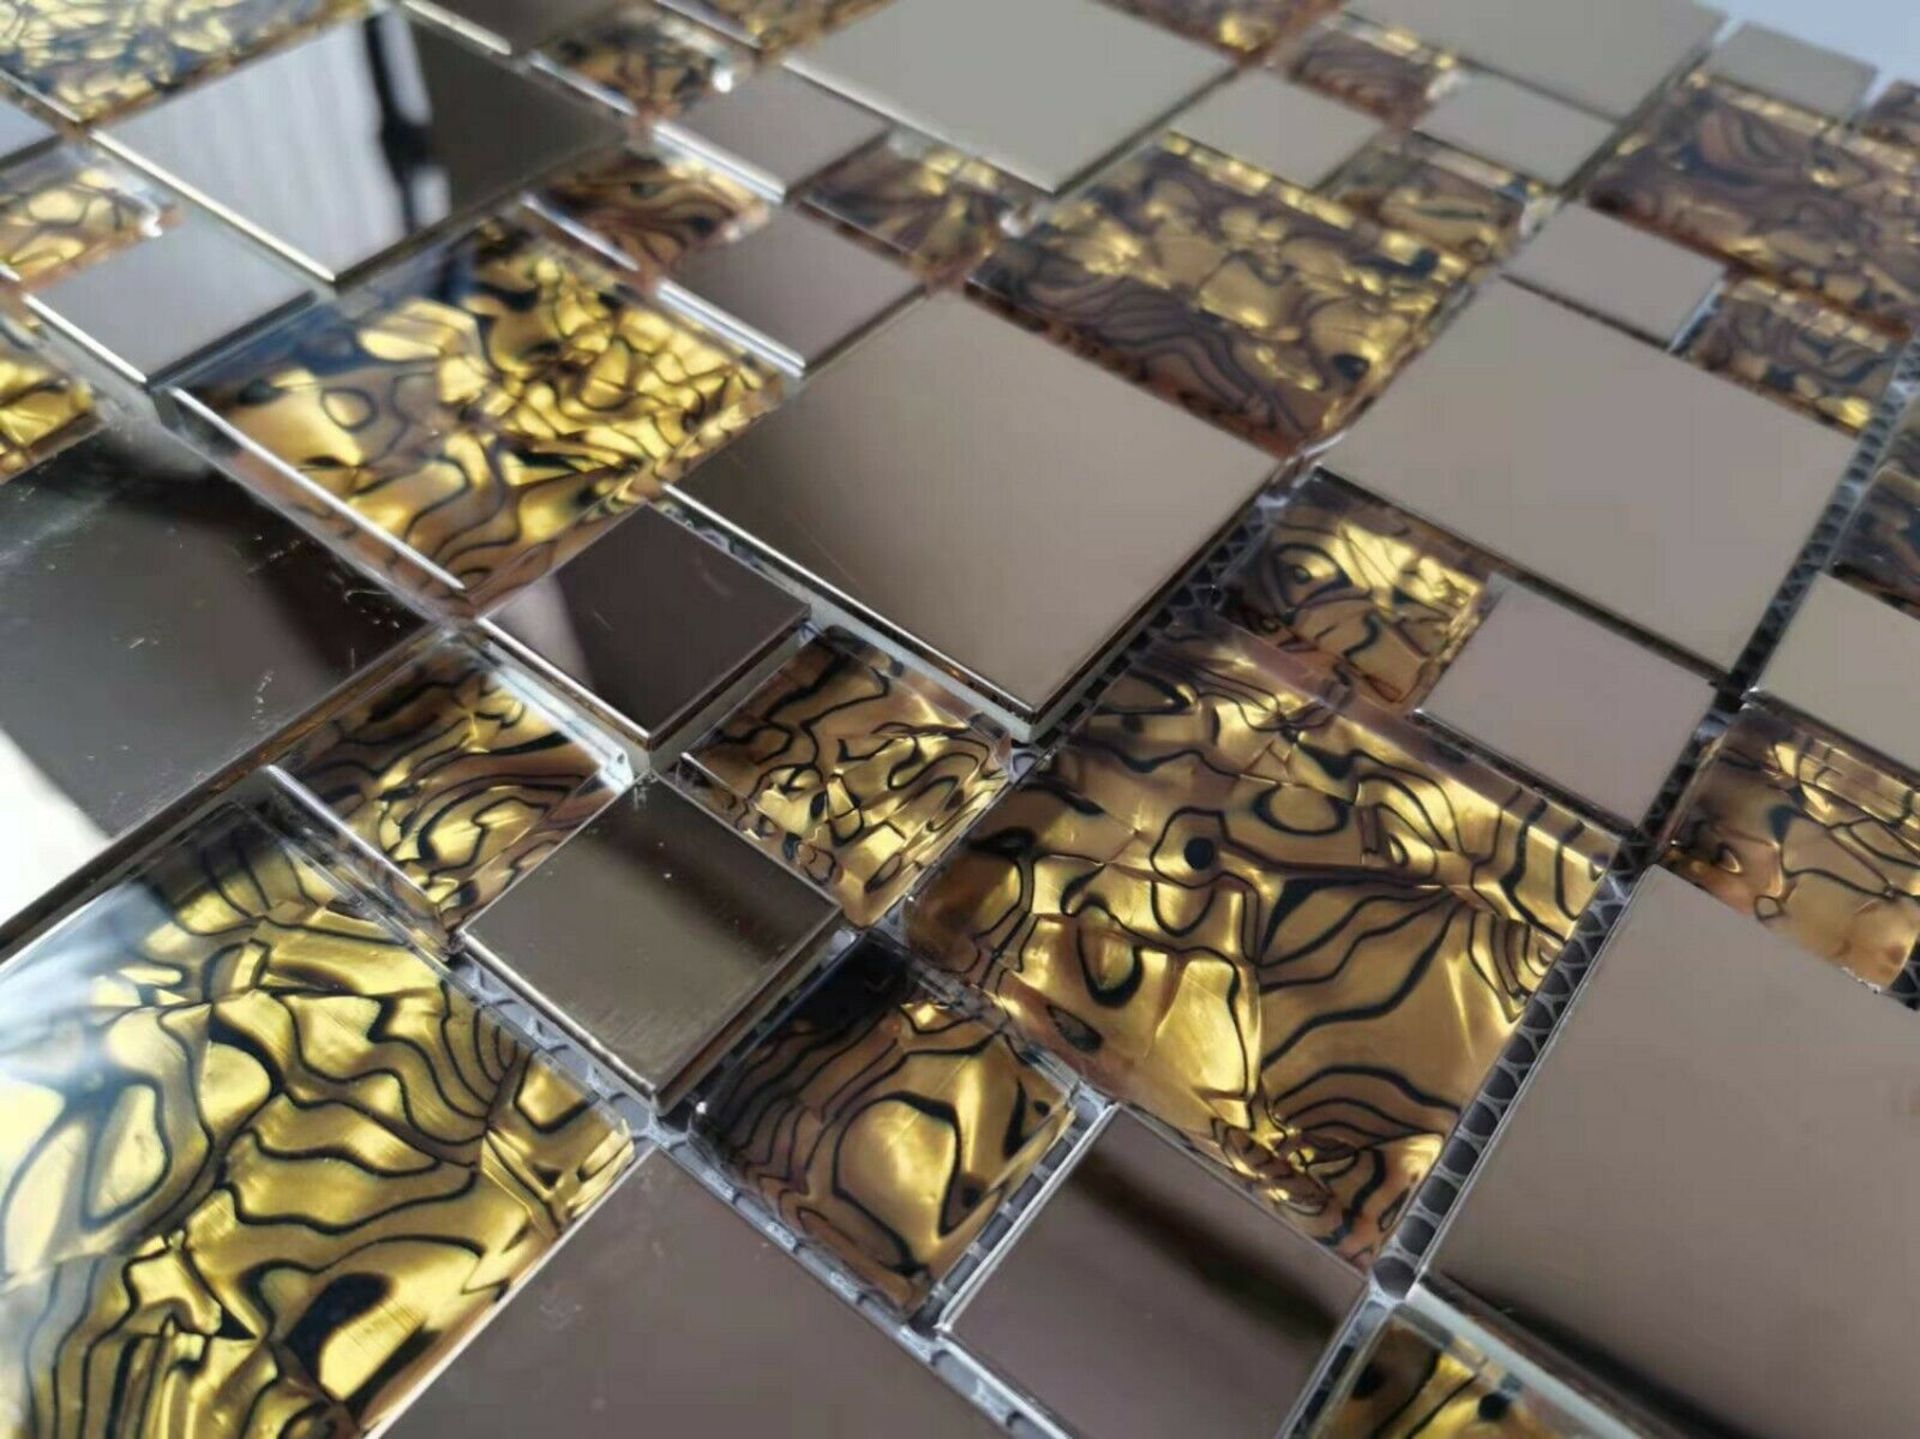 10 Square Metres - High Quality Glass/Stainless Steel Mosaic Tiles - Image 2 of 4